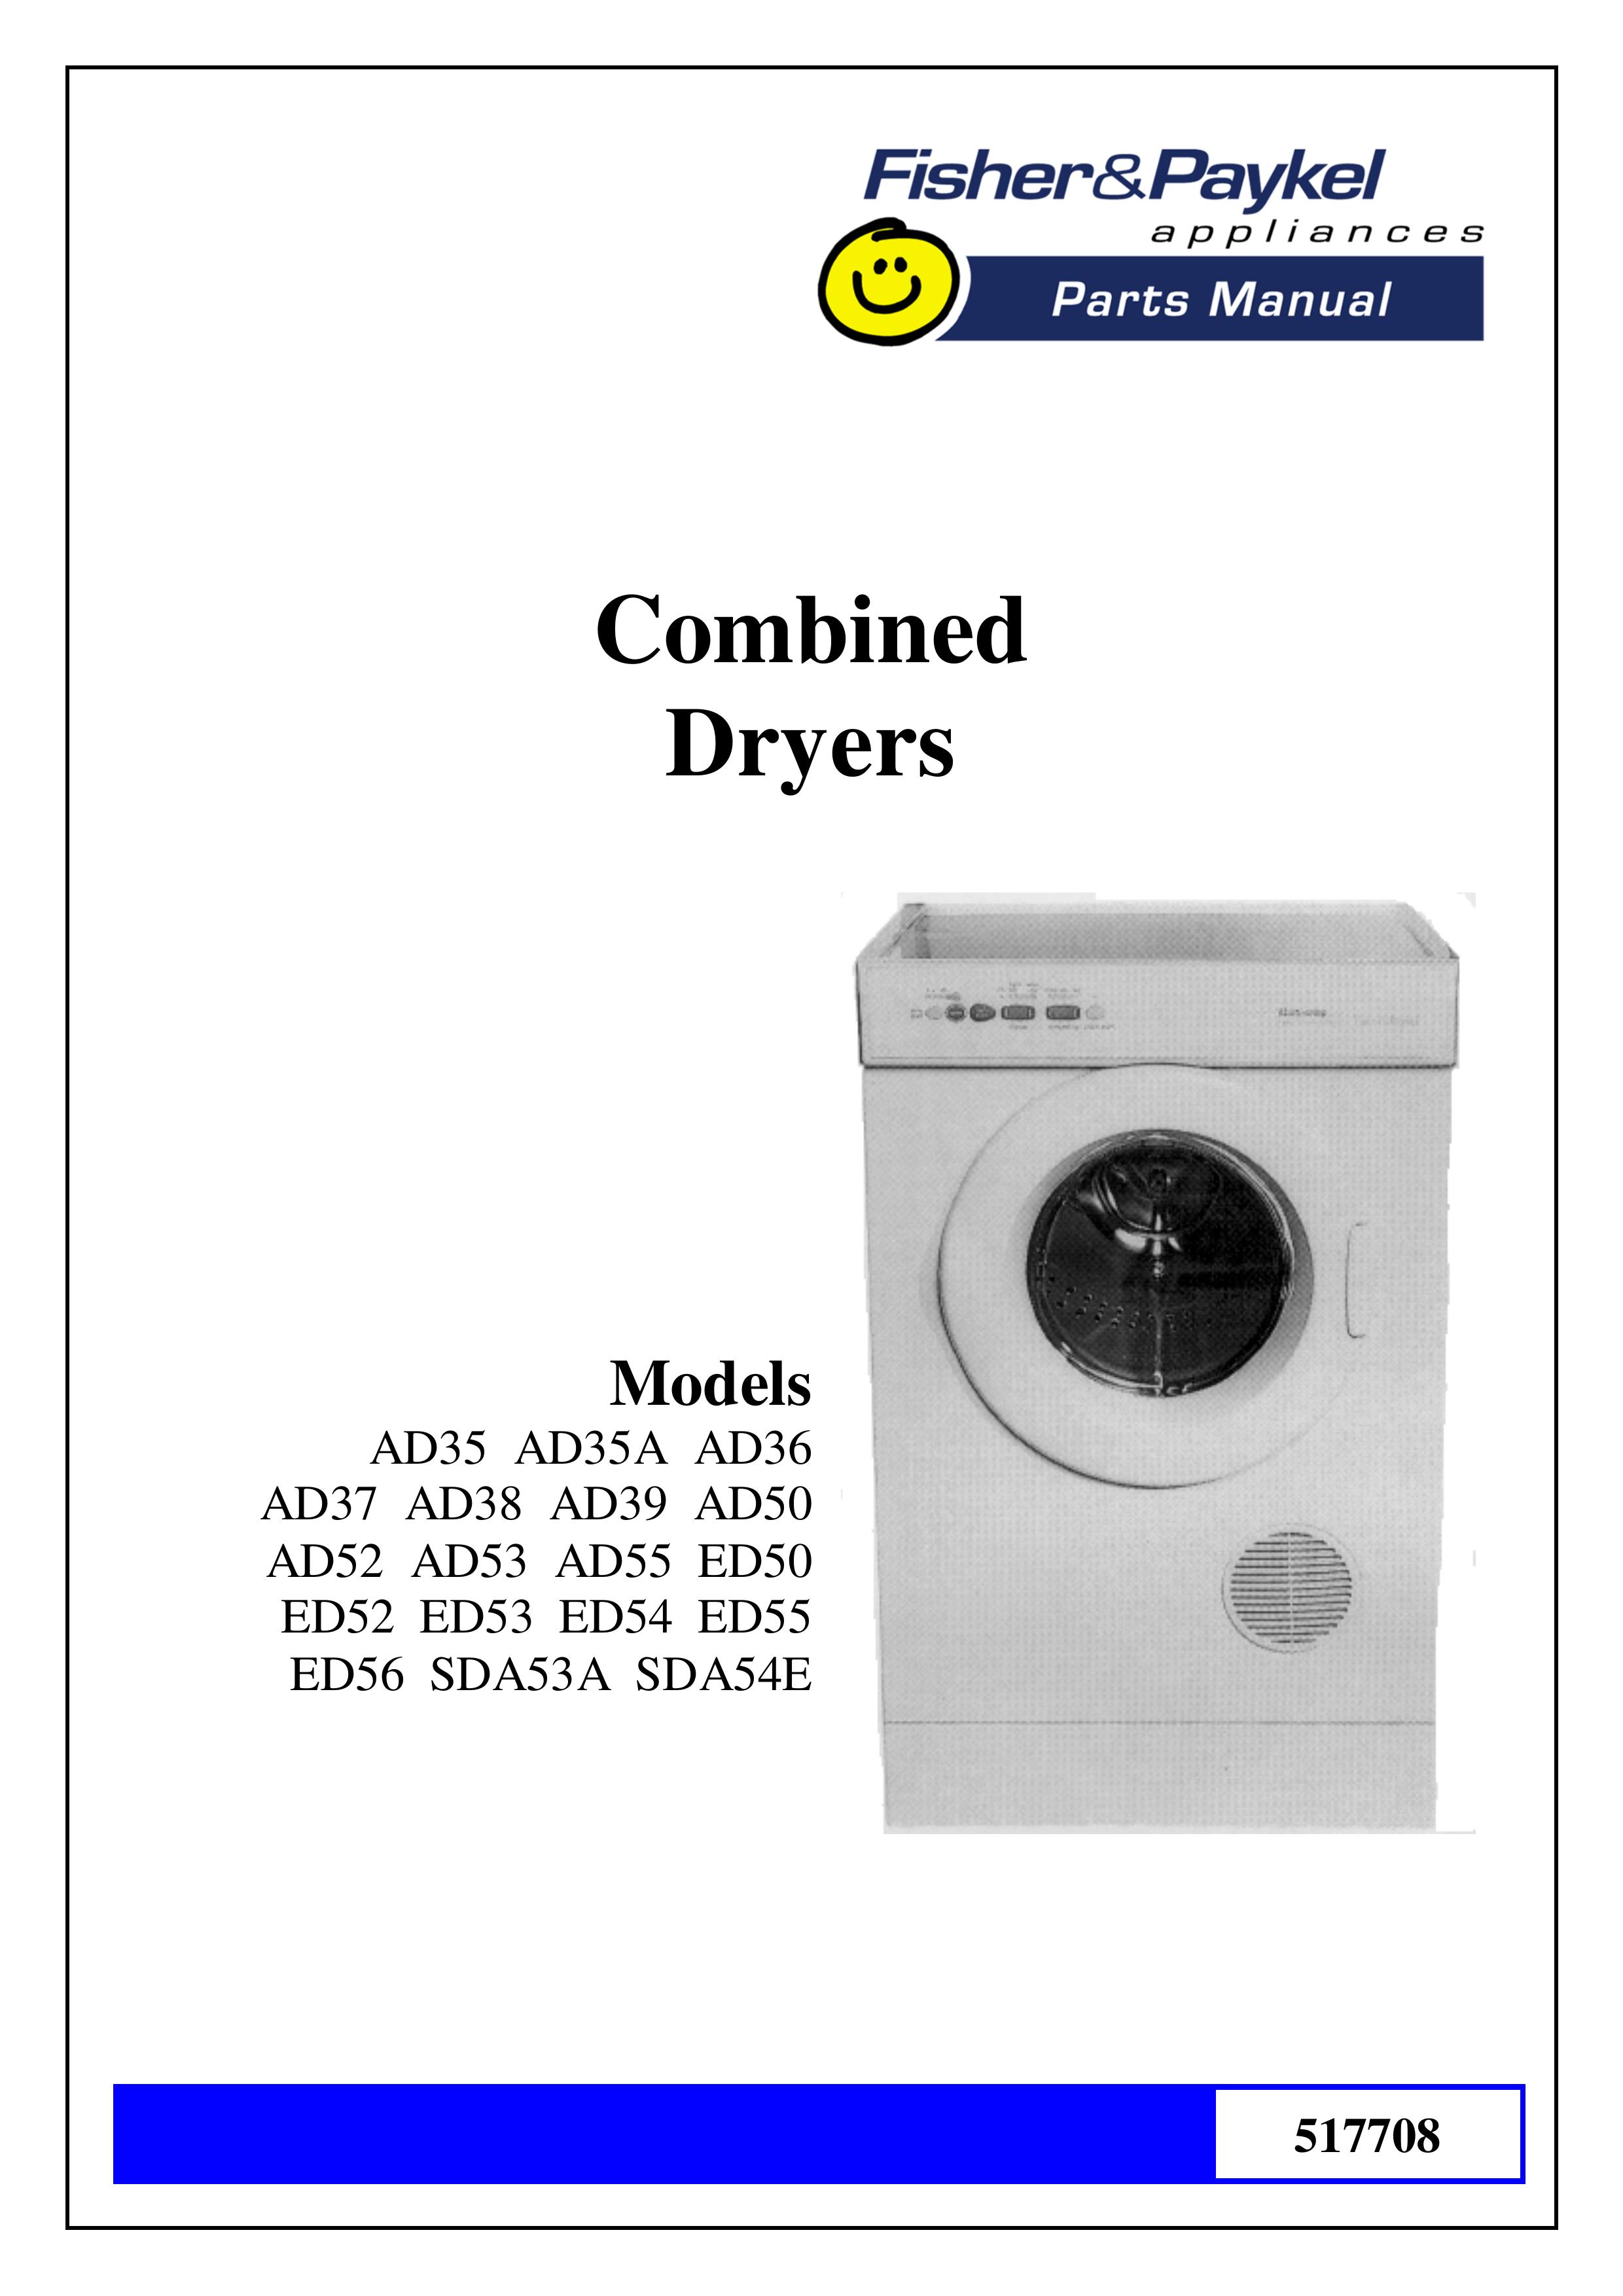 Fisher & Paykel ED50 Clothes Dryer User Manual